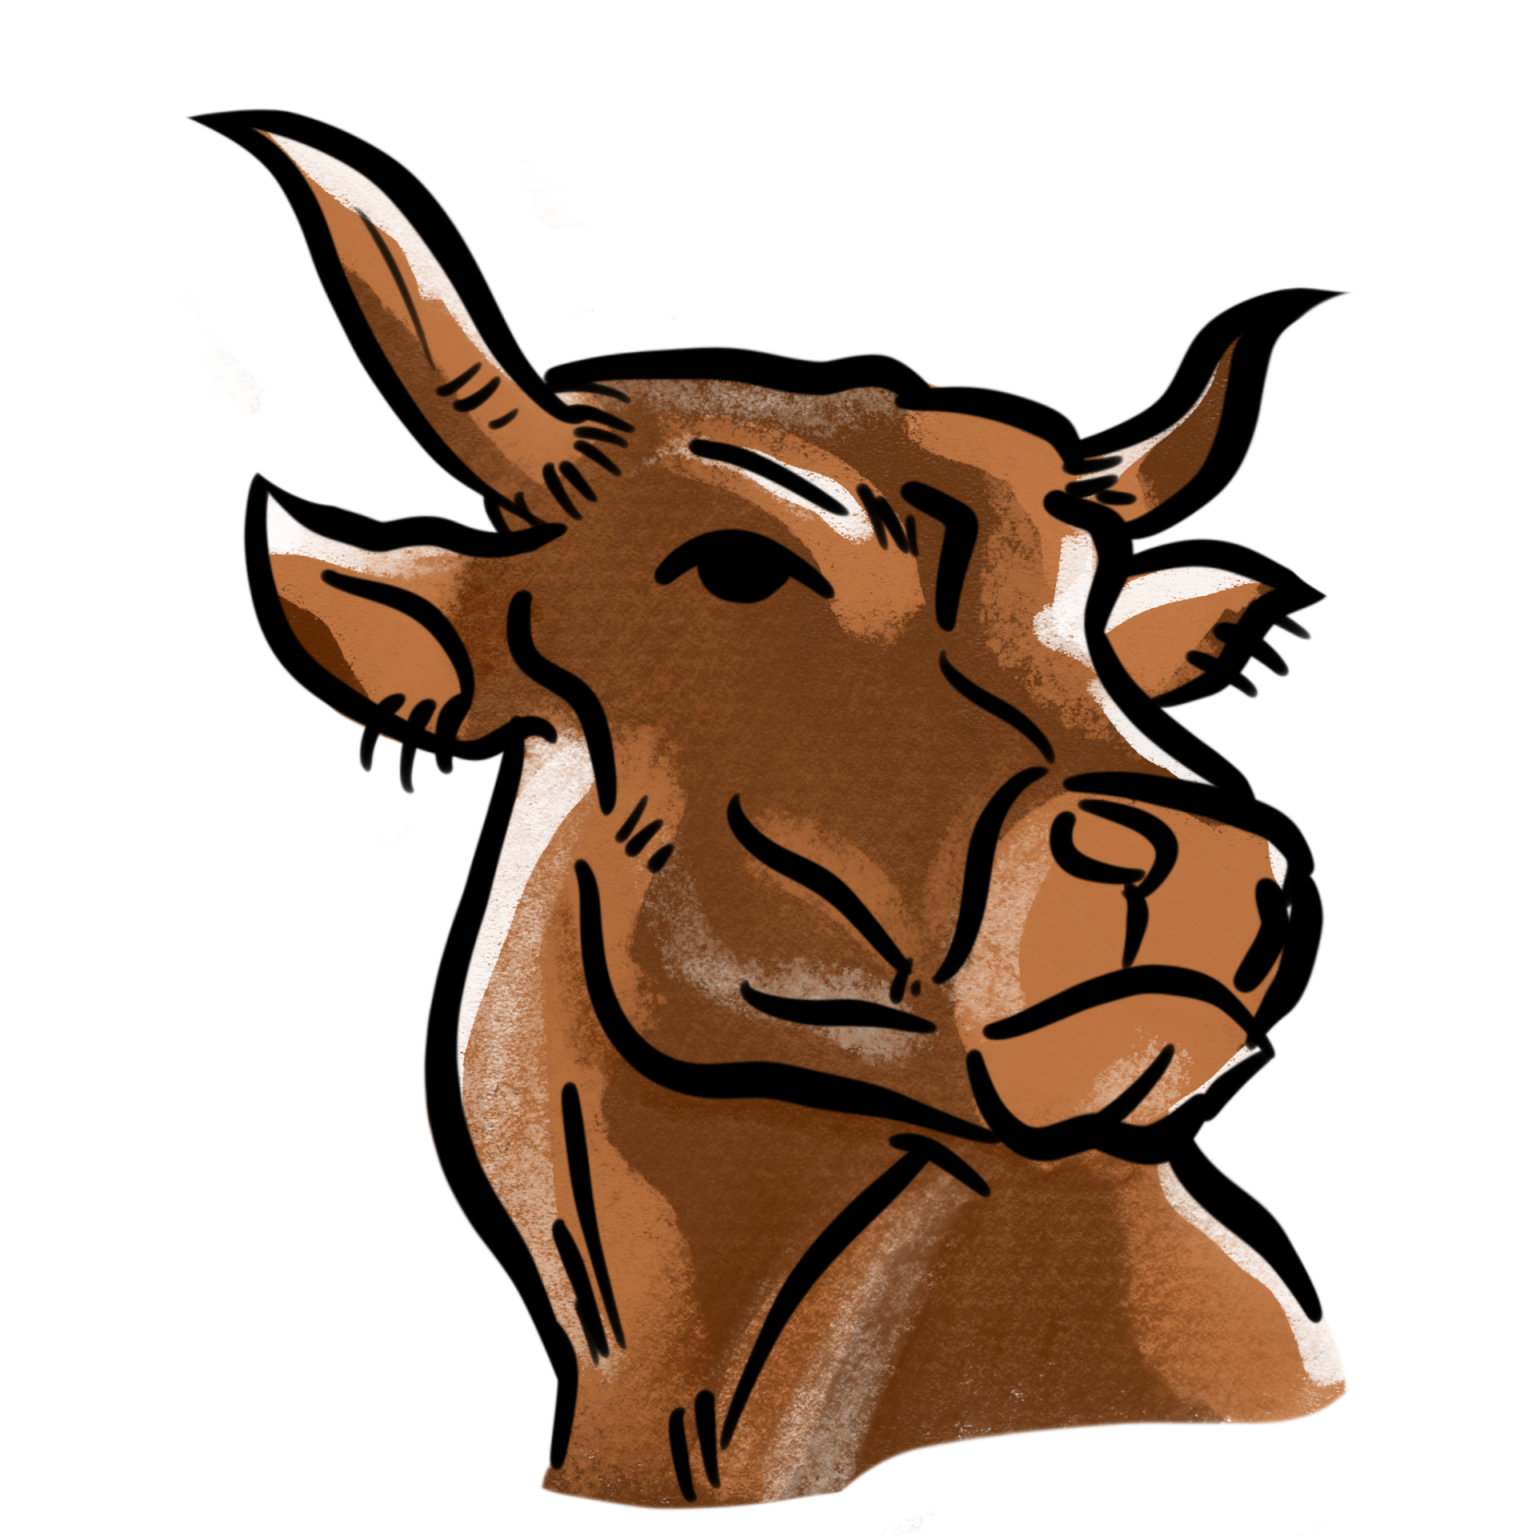 Cow Logo Png Png Download 53850 1536x1536 